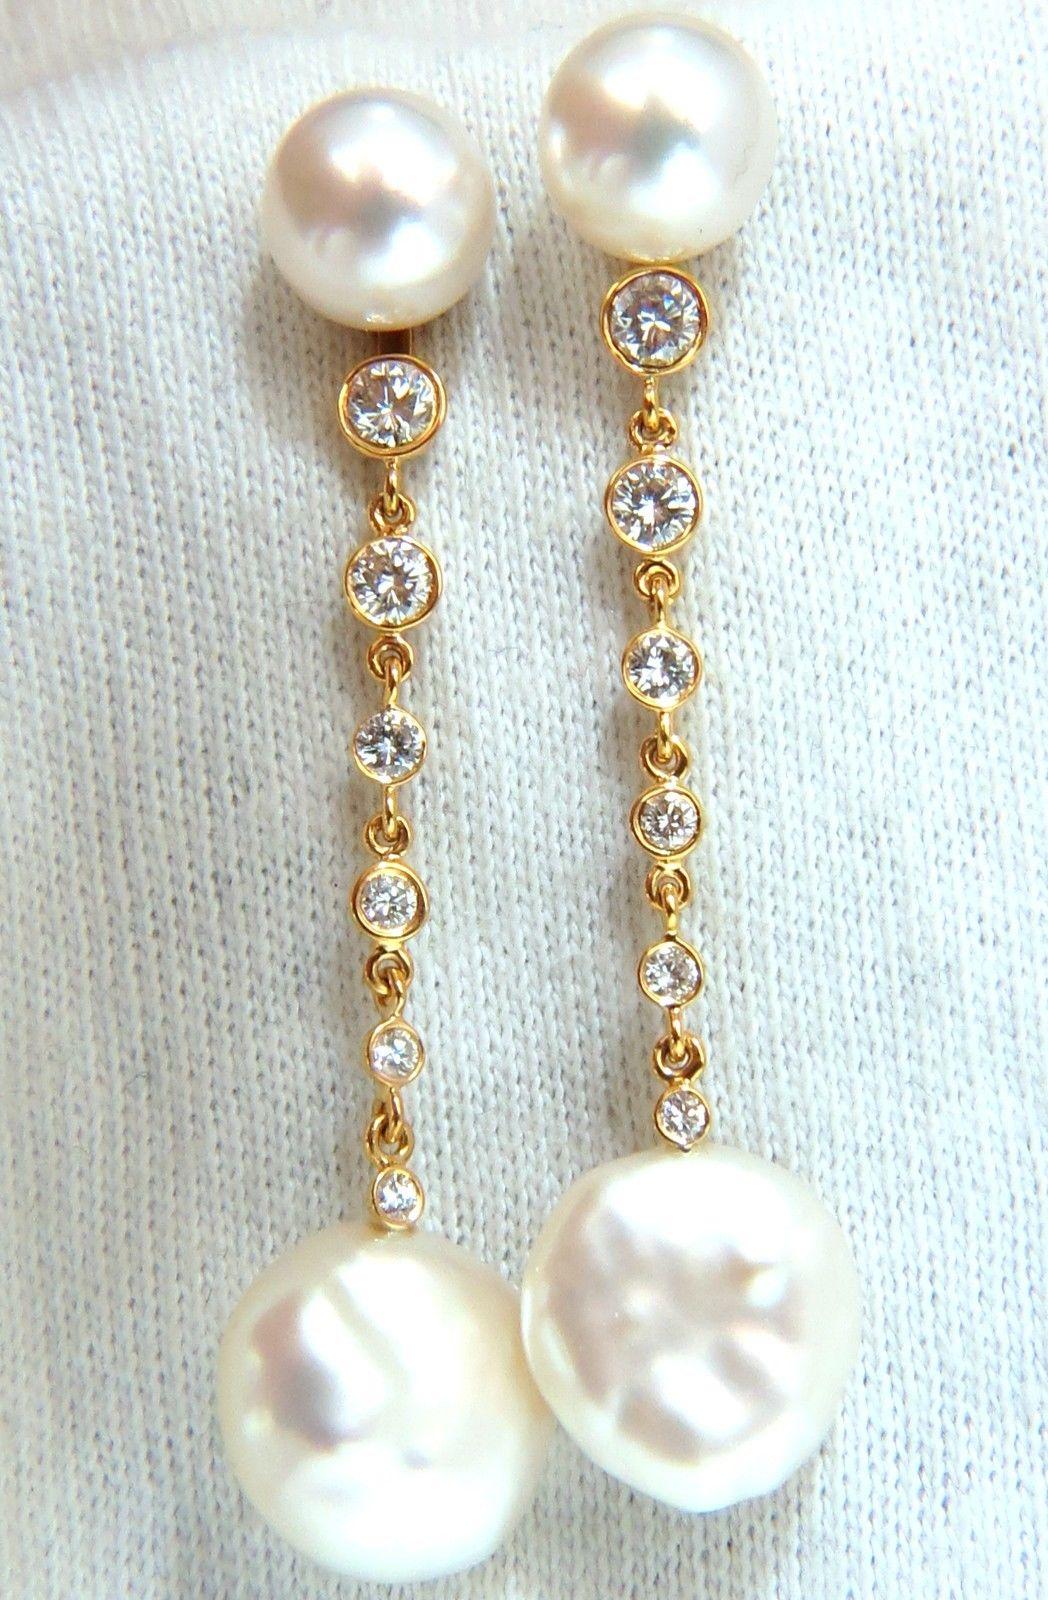 13mm round white pearl, south seas.



.80ct. round diamonds.



G-color & Vs-2 clarity.



Pearls Lower end:



13.5 X 7.5mm 





Overall earrings Measures:



2.13 inches long



14kt. yellow gold. 



8.5 Grams.



Beautiful Earrings.



$4,000